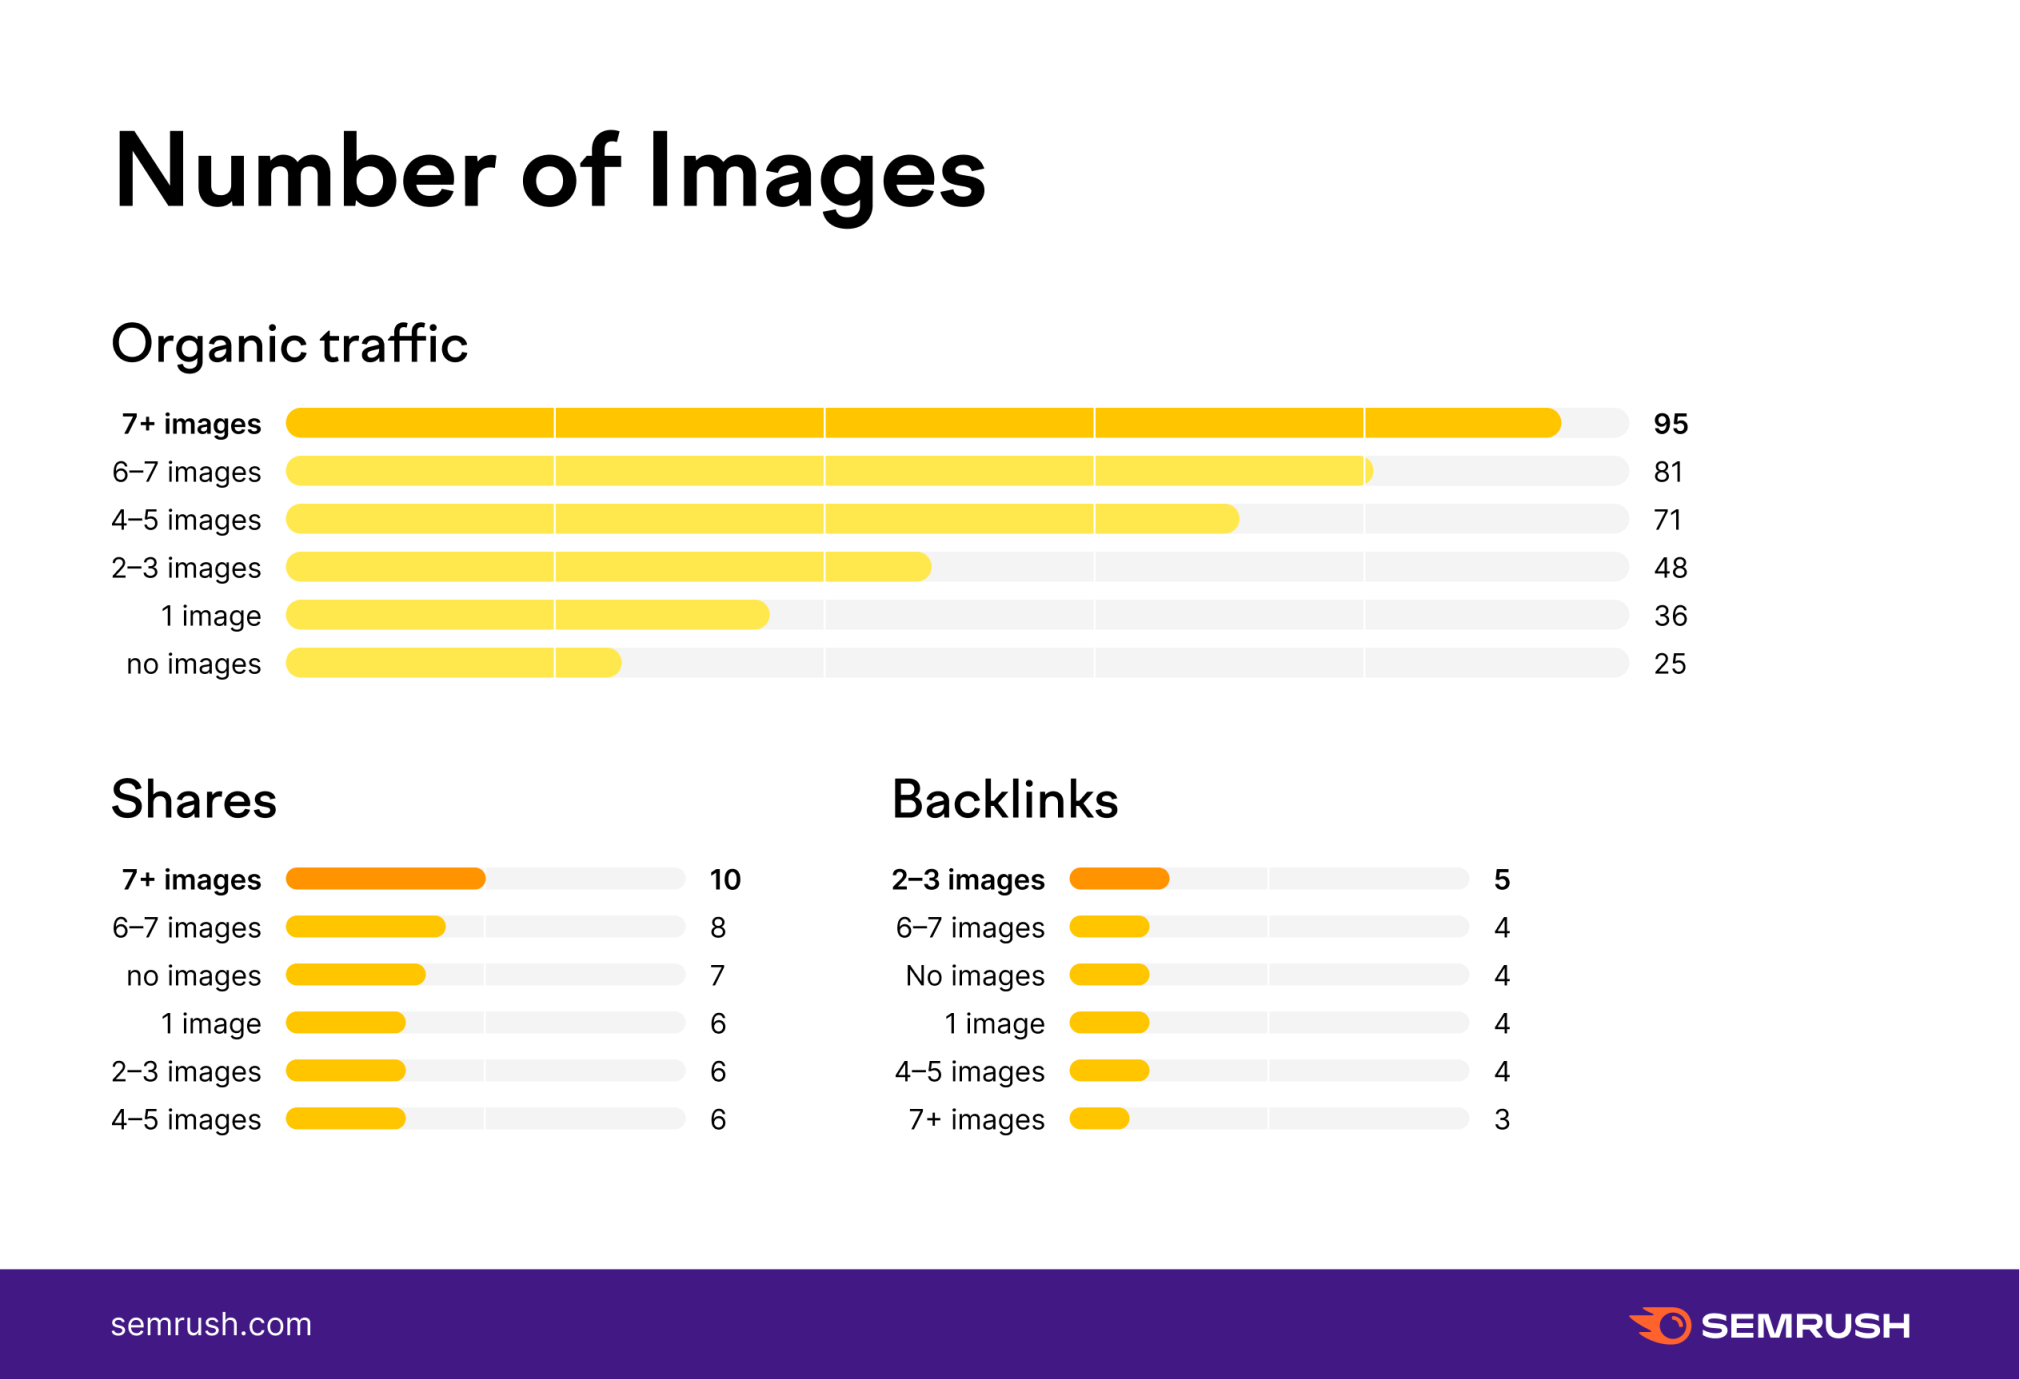 Adding images to your articles to generate more organic traffic